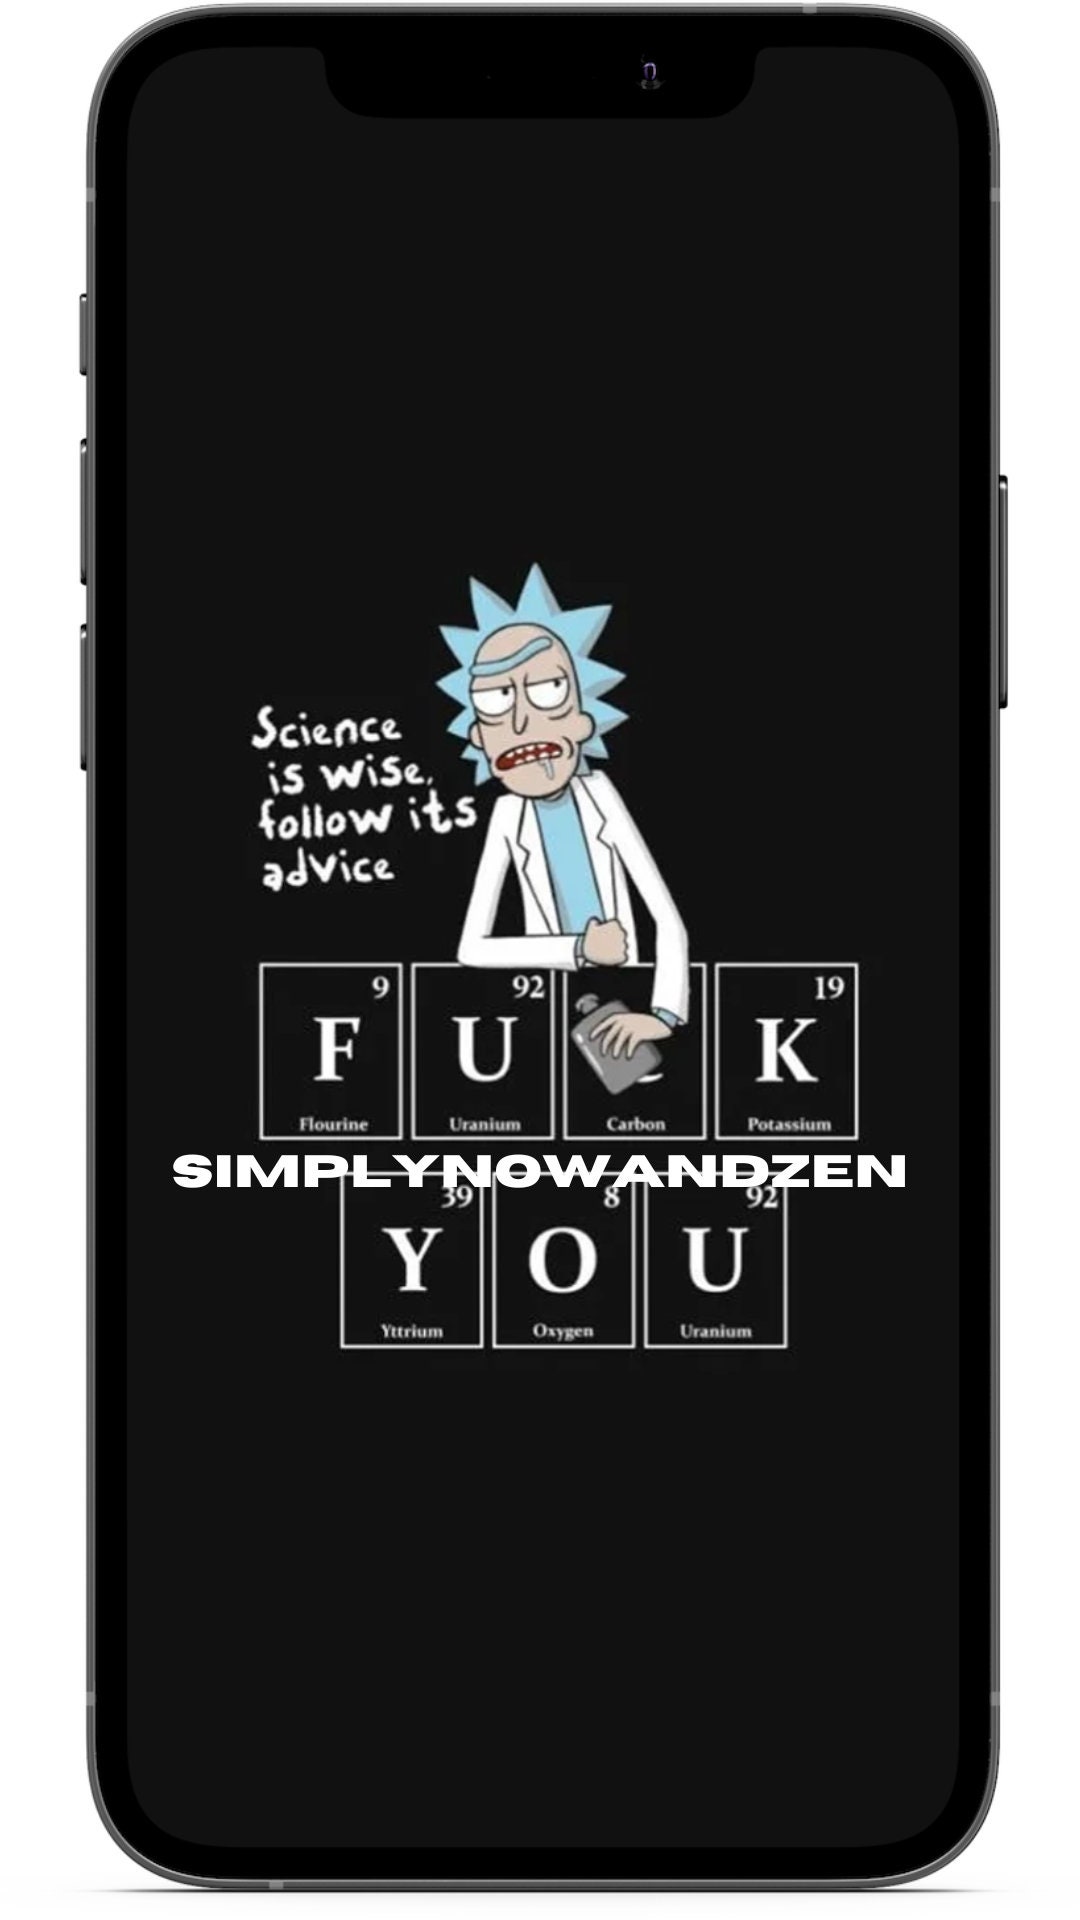 Cool Rick and Morty iPhone Wallpaper, Black Dark Wallpaper, Fun Moody  Wallpaper, Android Ios Aesthetic, iPad Theme, Removable Background PNG -   Norway